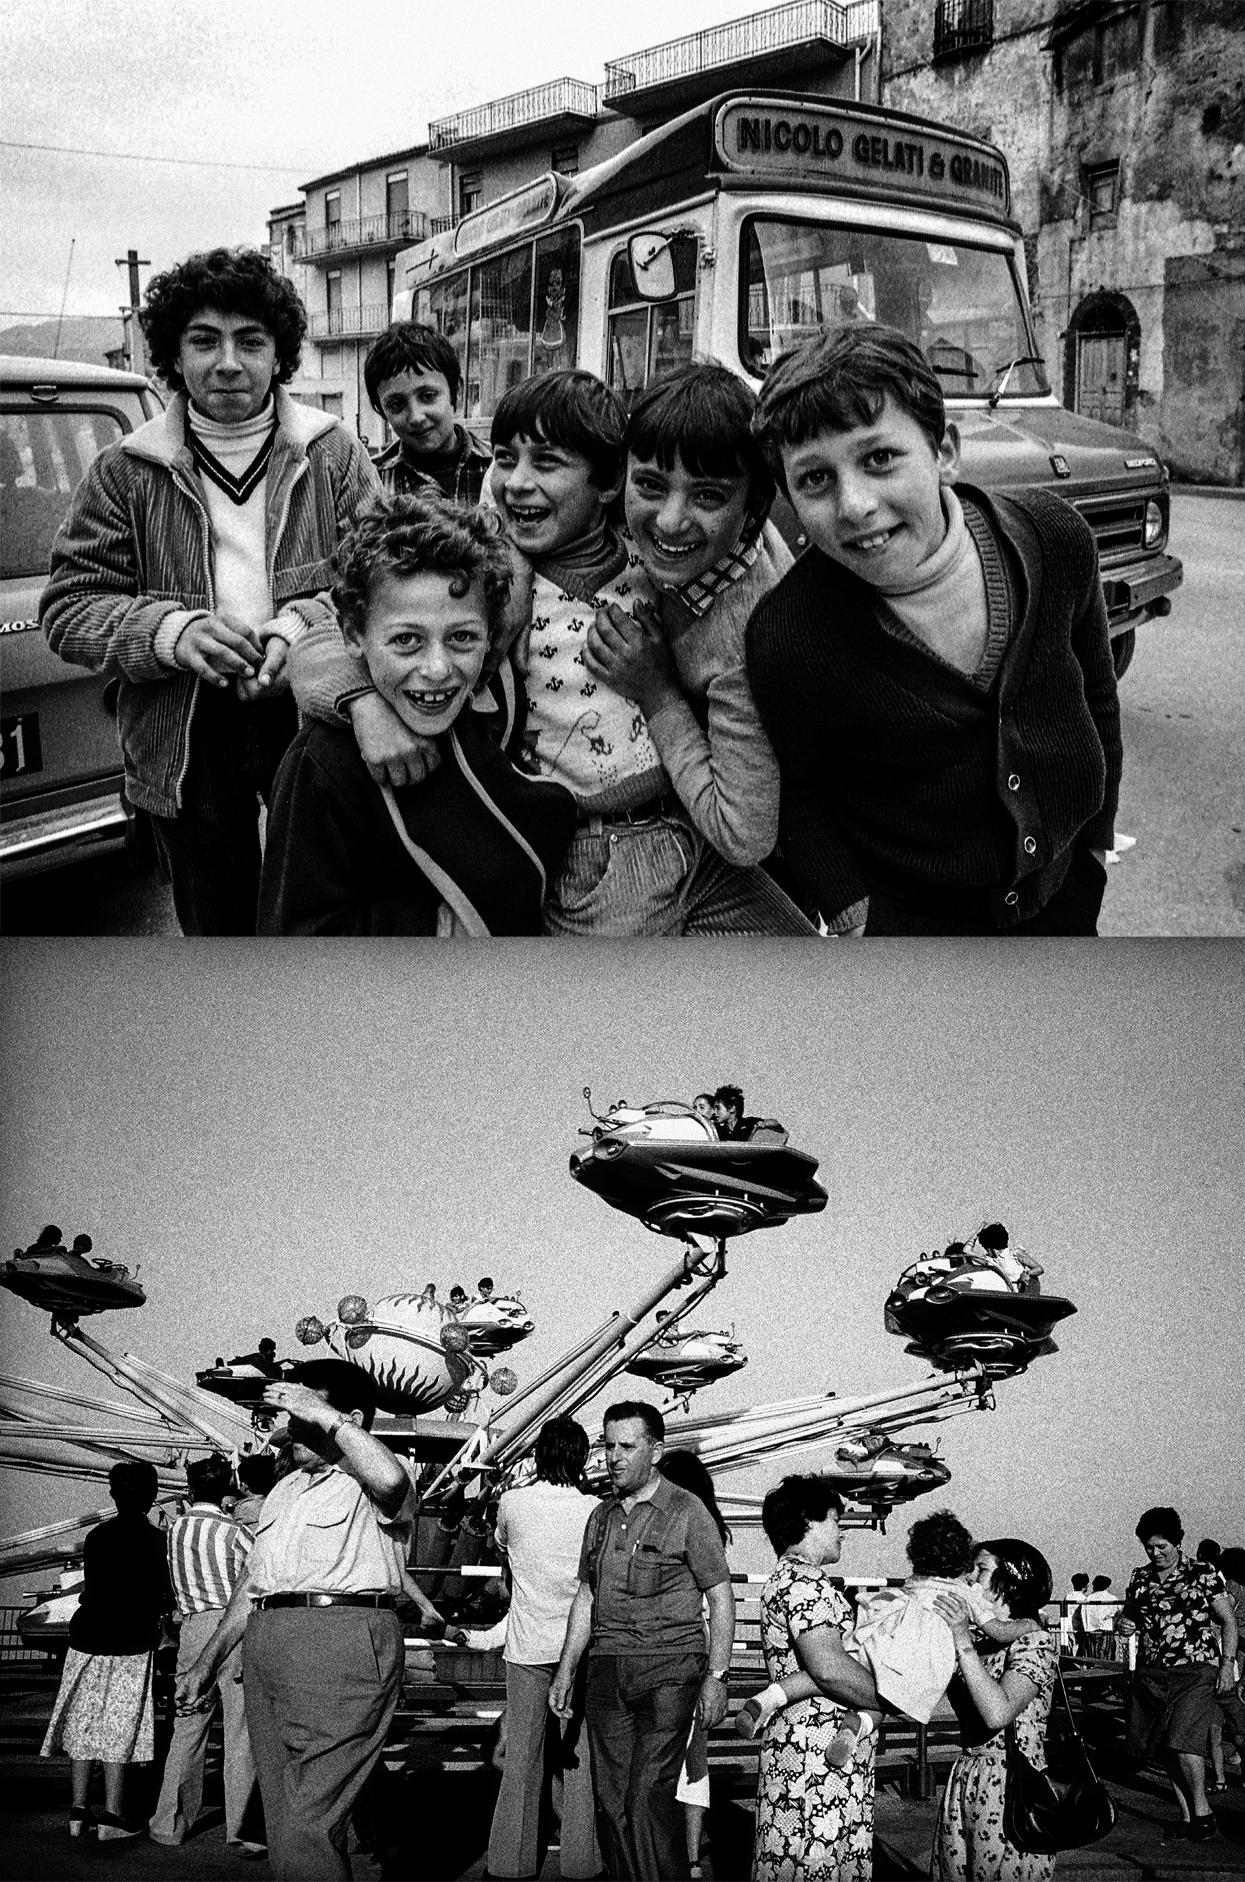 Montage of two photographs, one with children looking at the camera and another in an amusement park